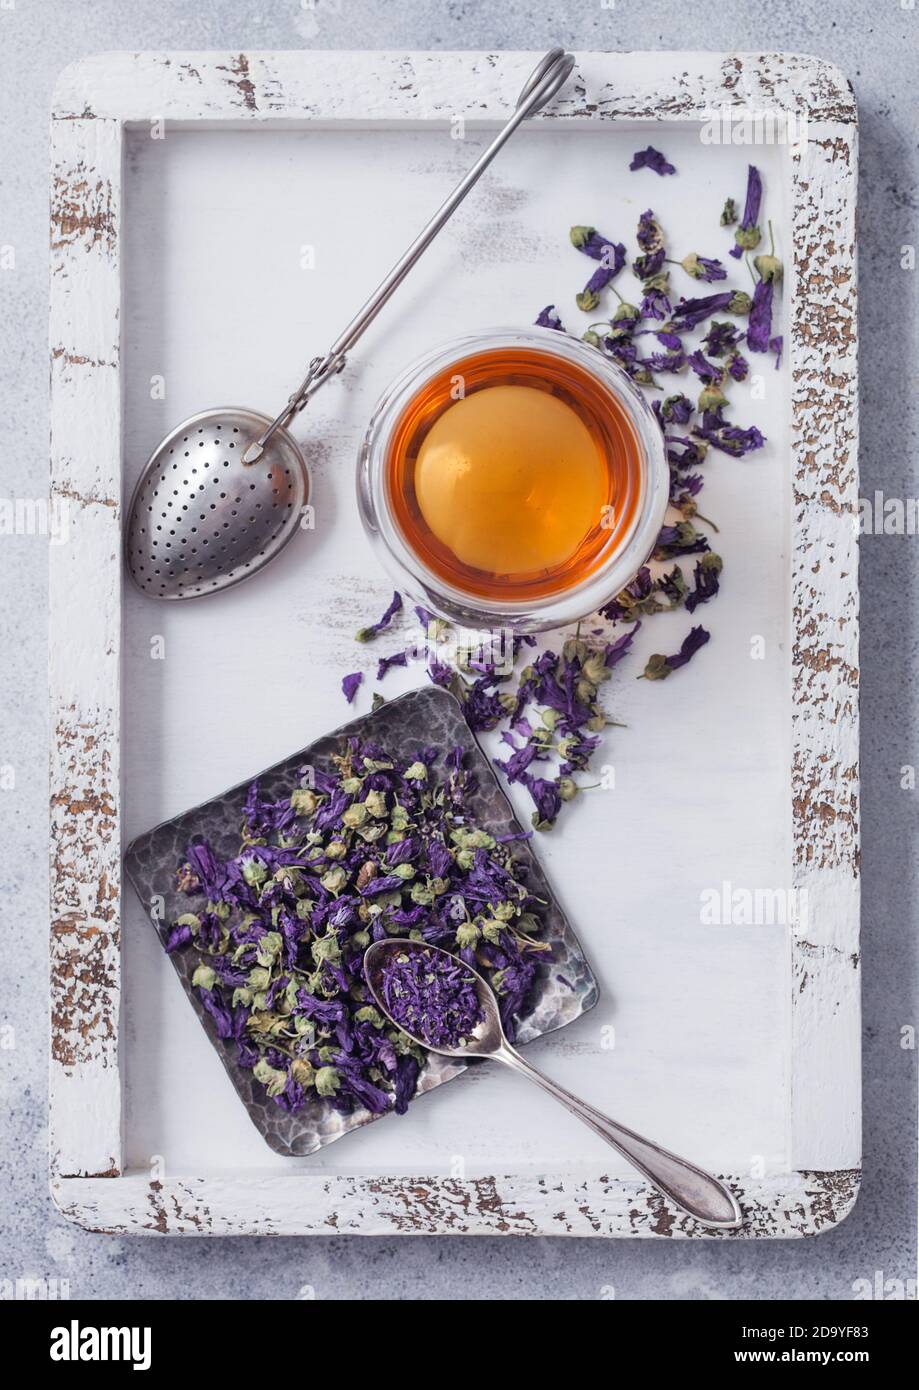 Blue Mallow Flowers Herbal Tea With Vintage Strainer Infuser In Wooden Box On White Table Background Top View Stock Photo Alamy